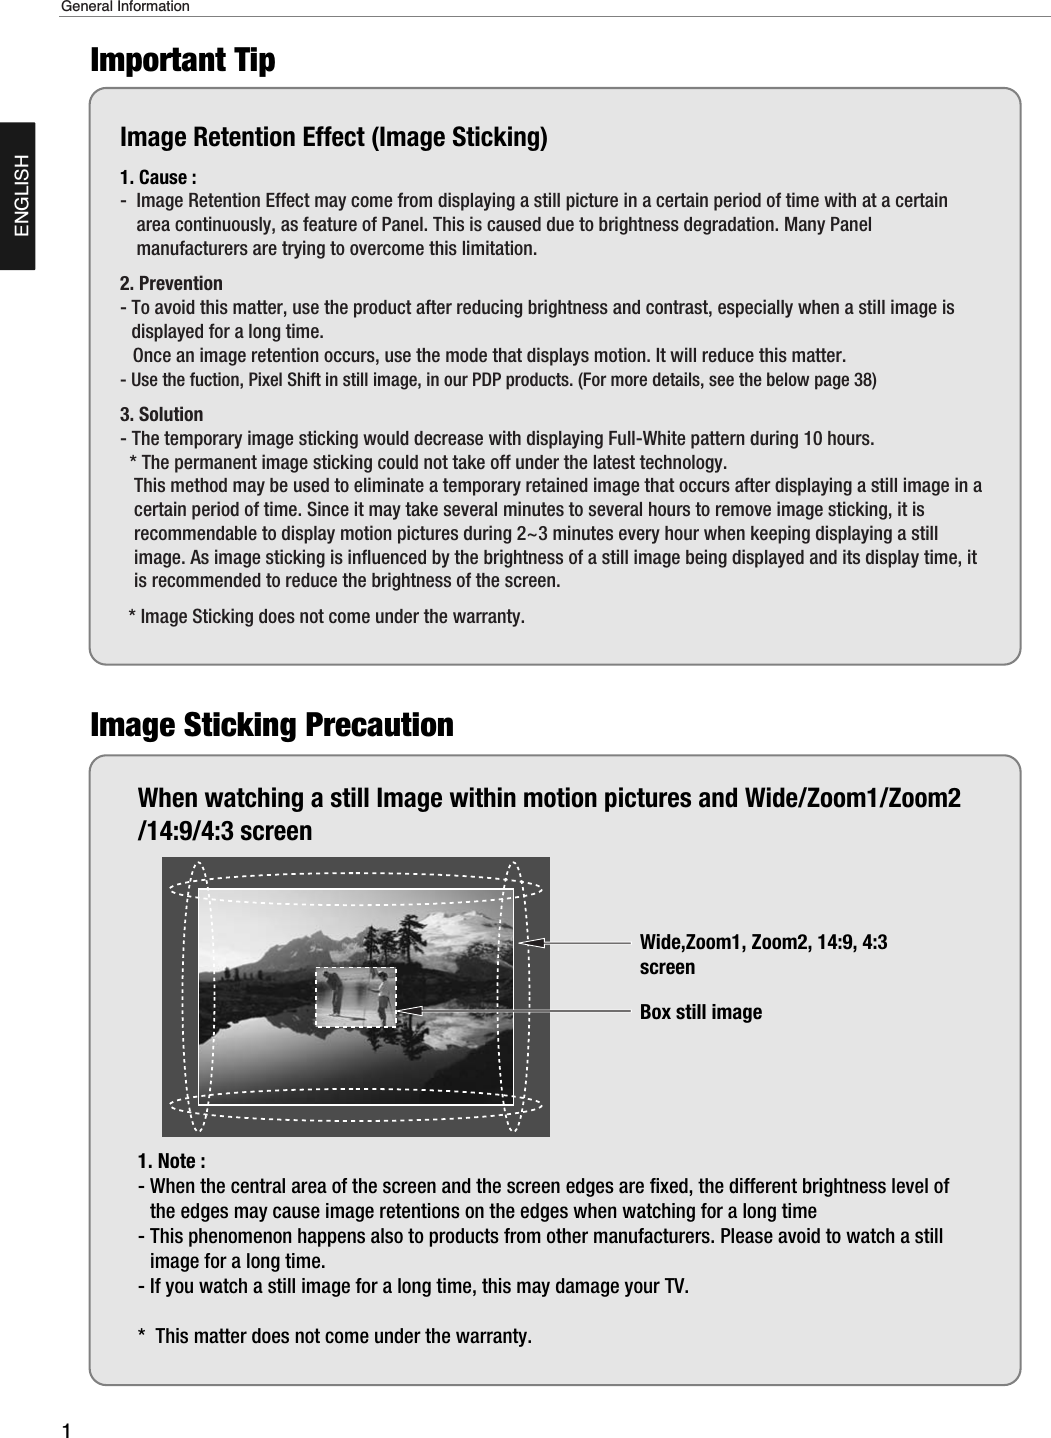 1General InformationENGLISHImage Retention Effect (Image Sticking)1. Cause : -  Image Retention Effect may come from displaying a still picture in a certain period of time with at a certainarea continuously, as feature of Panel. This is caused due to brightness degradation. Many Panelmanufacturers are trying to overcome this limitation.2. Prevention- To avoid this matter, use the product after reducing brightness and contrast, especially when a still image isdisplayed for a long time. Once an image retention occurs, use the mode that displays motion. It will reduce this matter.- Use the fuction, Pixel Shift in still image, in our PDP products. (For more details, see the below page 38)3. Solution - The temporary image sticking would decrease with displaying Full-White pattern during 10 hours.* The permanent image sticking could not take off under the latest technology.This method may be used to eliminate a temporary retained image that occurs after displaying a still image in acertain period of time. Since it may take several minutes to several hours to remove image sticking, it isrecommendable to display motion pictures during 2~3 minutes every hour when keeping displaying a stillimage. As image sticking is influenced by the brightness of a still image being displayed and its display time, itis recommended to reduce the brightness of the screen.* Image Sticking does not come under the warranty.When watching a still Image within motion pictures and Wide/Zoom1/Zoom2/14:9/4:3 screen1. Note : - When the central area of the screen and the screen edges are fixed, the different brightness level ofthe edges may cause image retentions on the edges when watching for a long time- This phenomenon happens also to products from other manufacturers. Please avoid to watch a stillimage for a long time.- If you watch a still image for a long time, this may damage your TV.*  This matter does not come under the warranty.  Wide,Zoom1, Zoom2, 14:9, 4:3screenBox still imageImportant TipImage Sticking Precaution